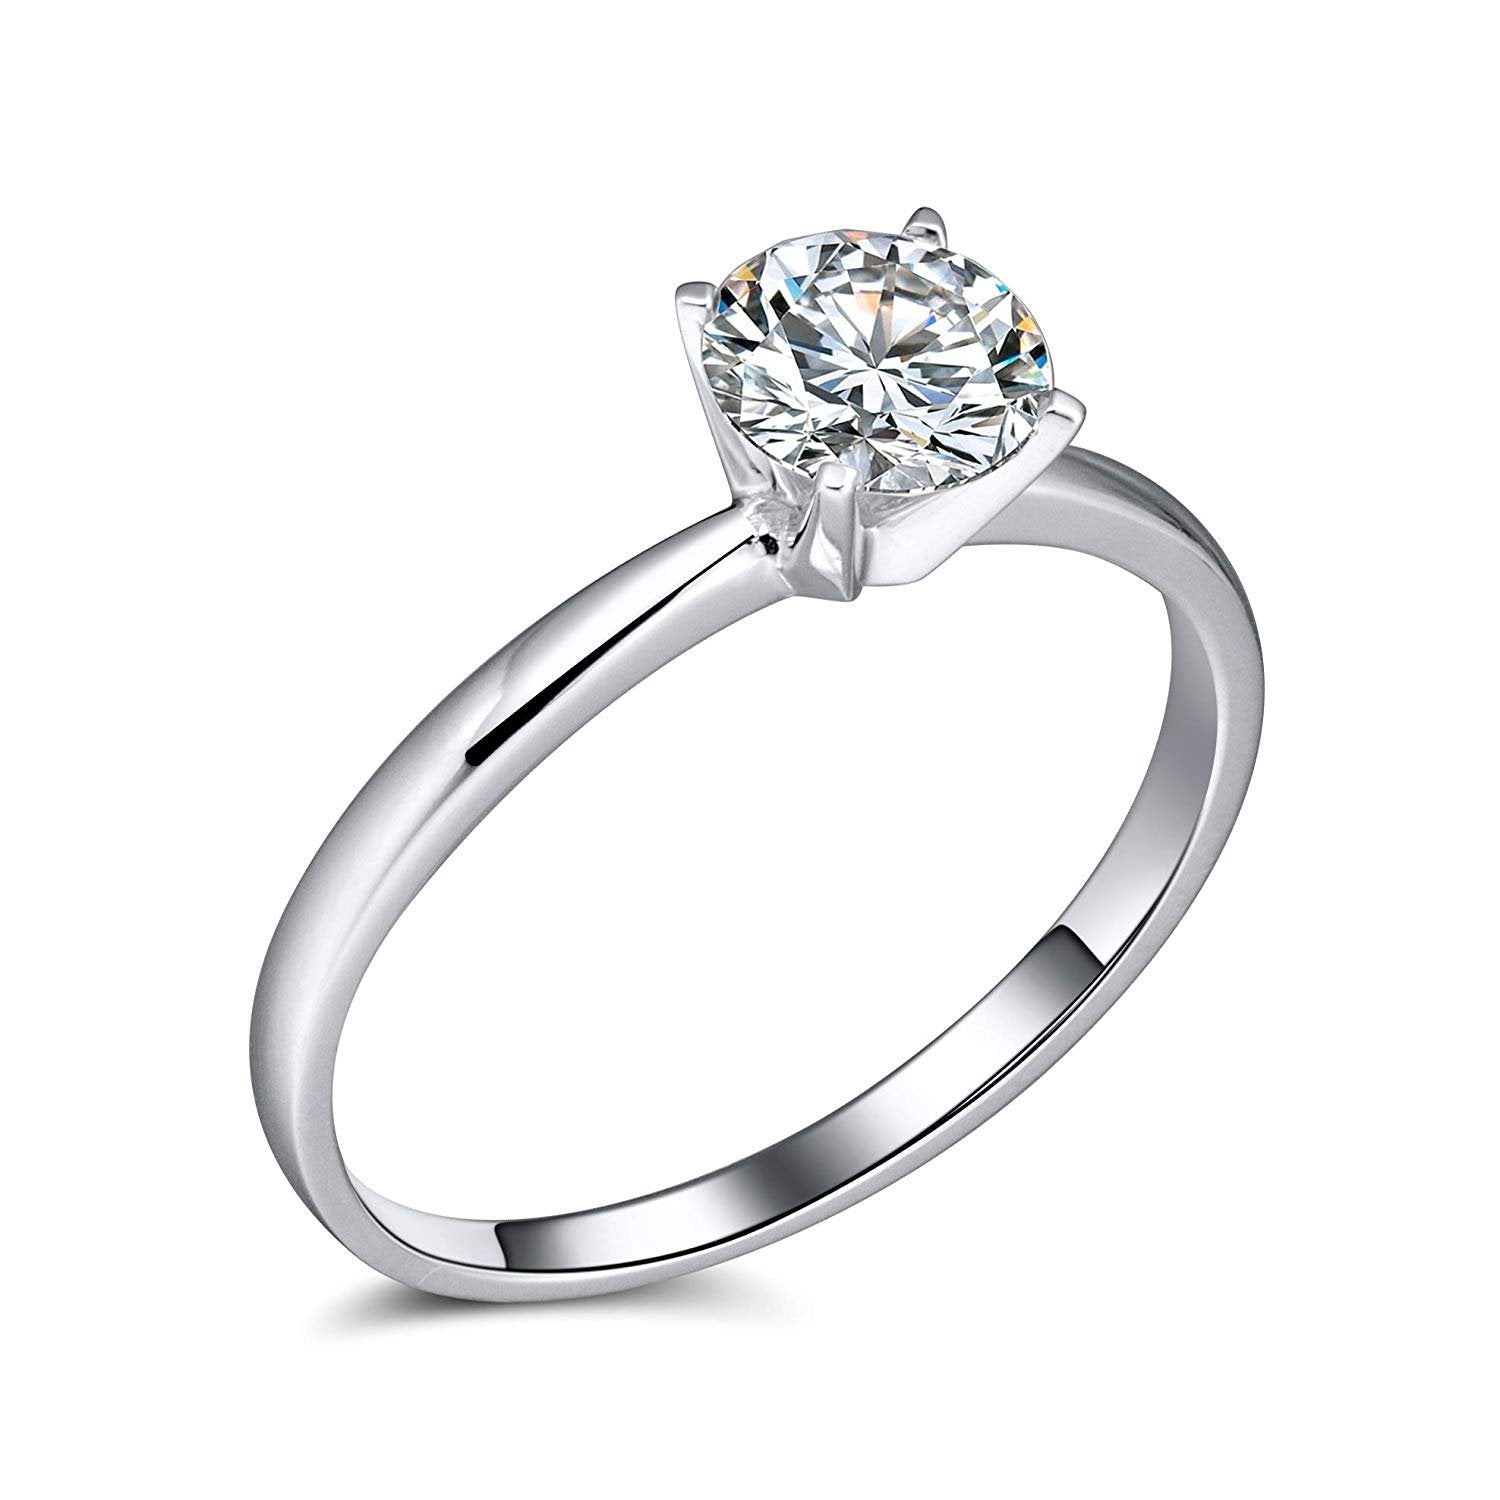 Amore Engagement Ring Women 1Ct Moissanite Sterling Silver Ginger Lyne Collection - 1CT Silver,5